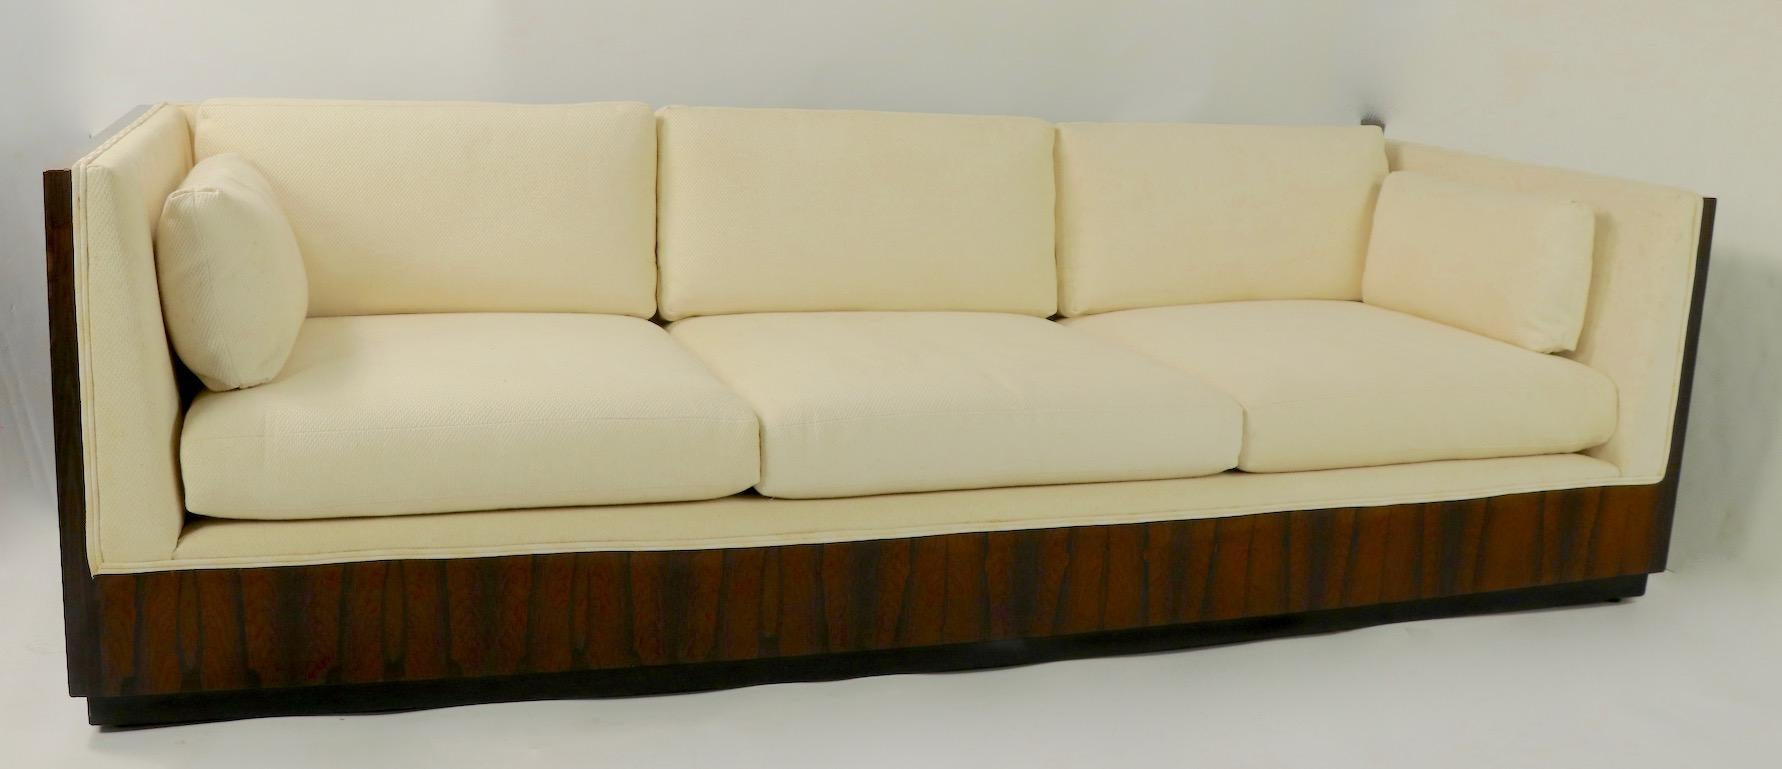 Chic architectural case, or box, sofa designed by Milo Baughman for Thayer Coggin. Nice large full size example having vibrant rosewood veneer case and original off white fabric. This example is selling in original, untouched condition, it shows